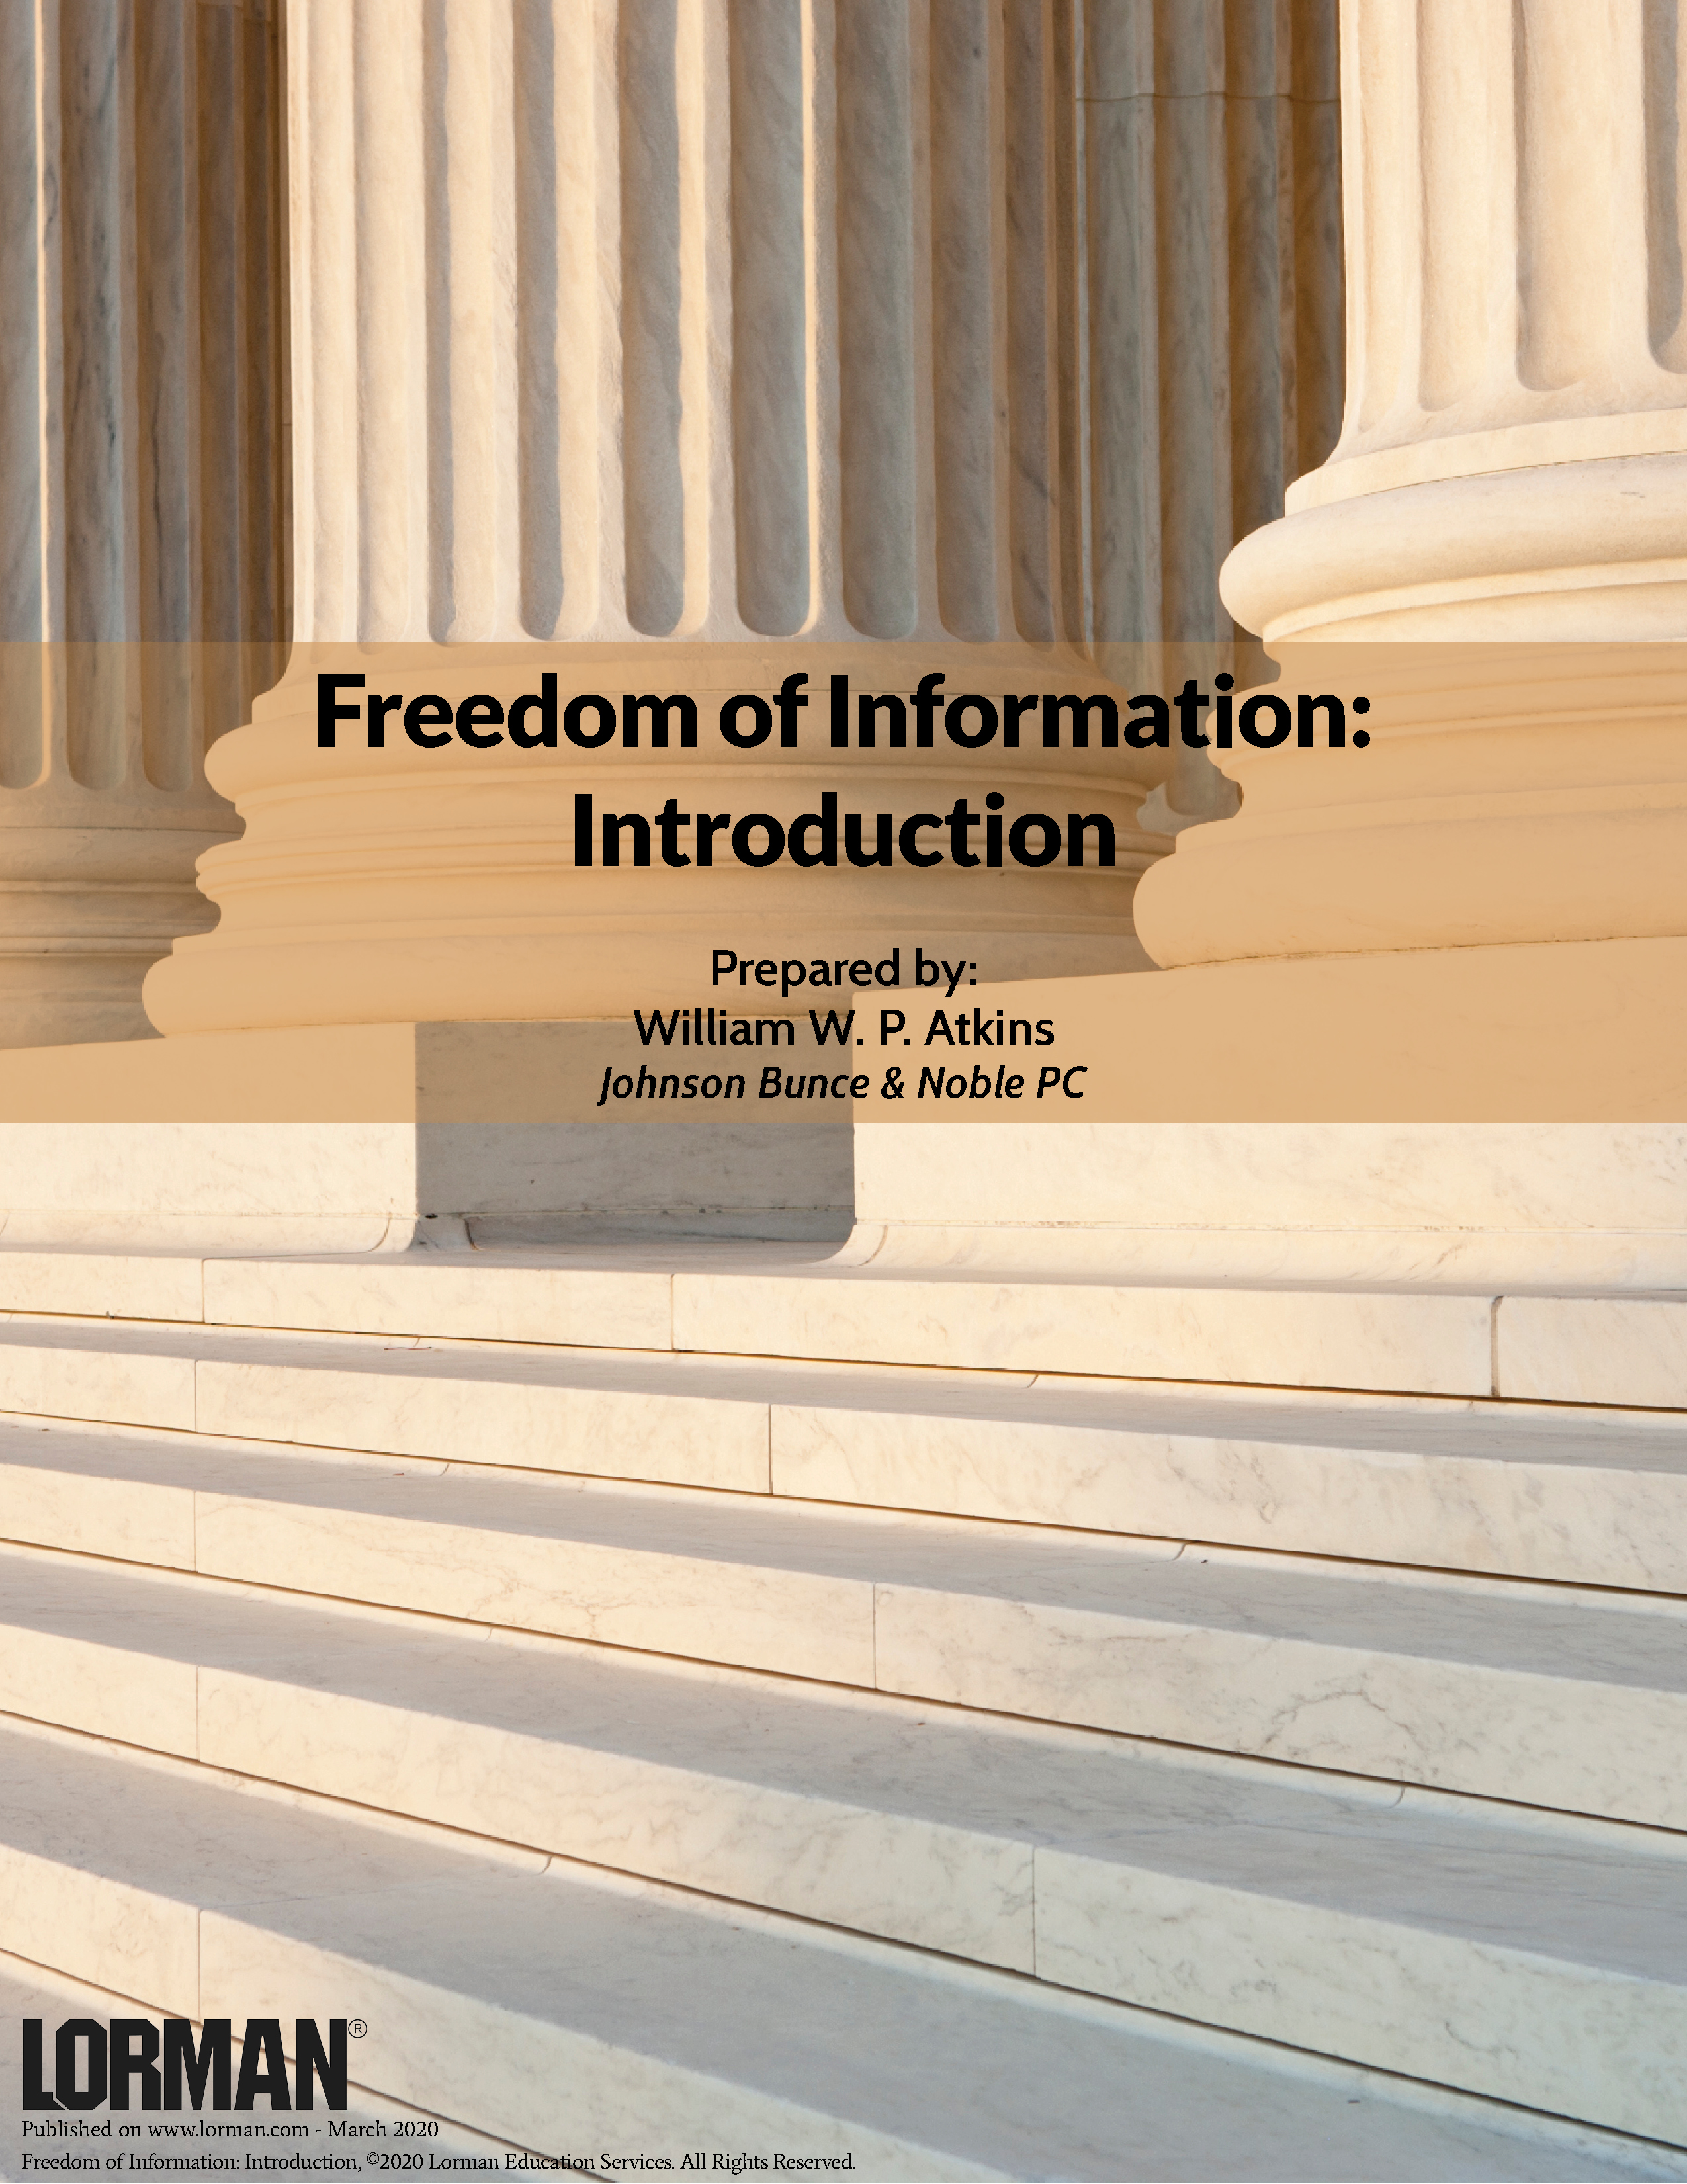 Freedom of Information: Introduction